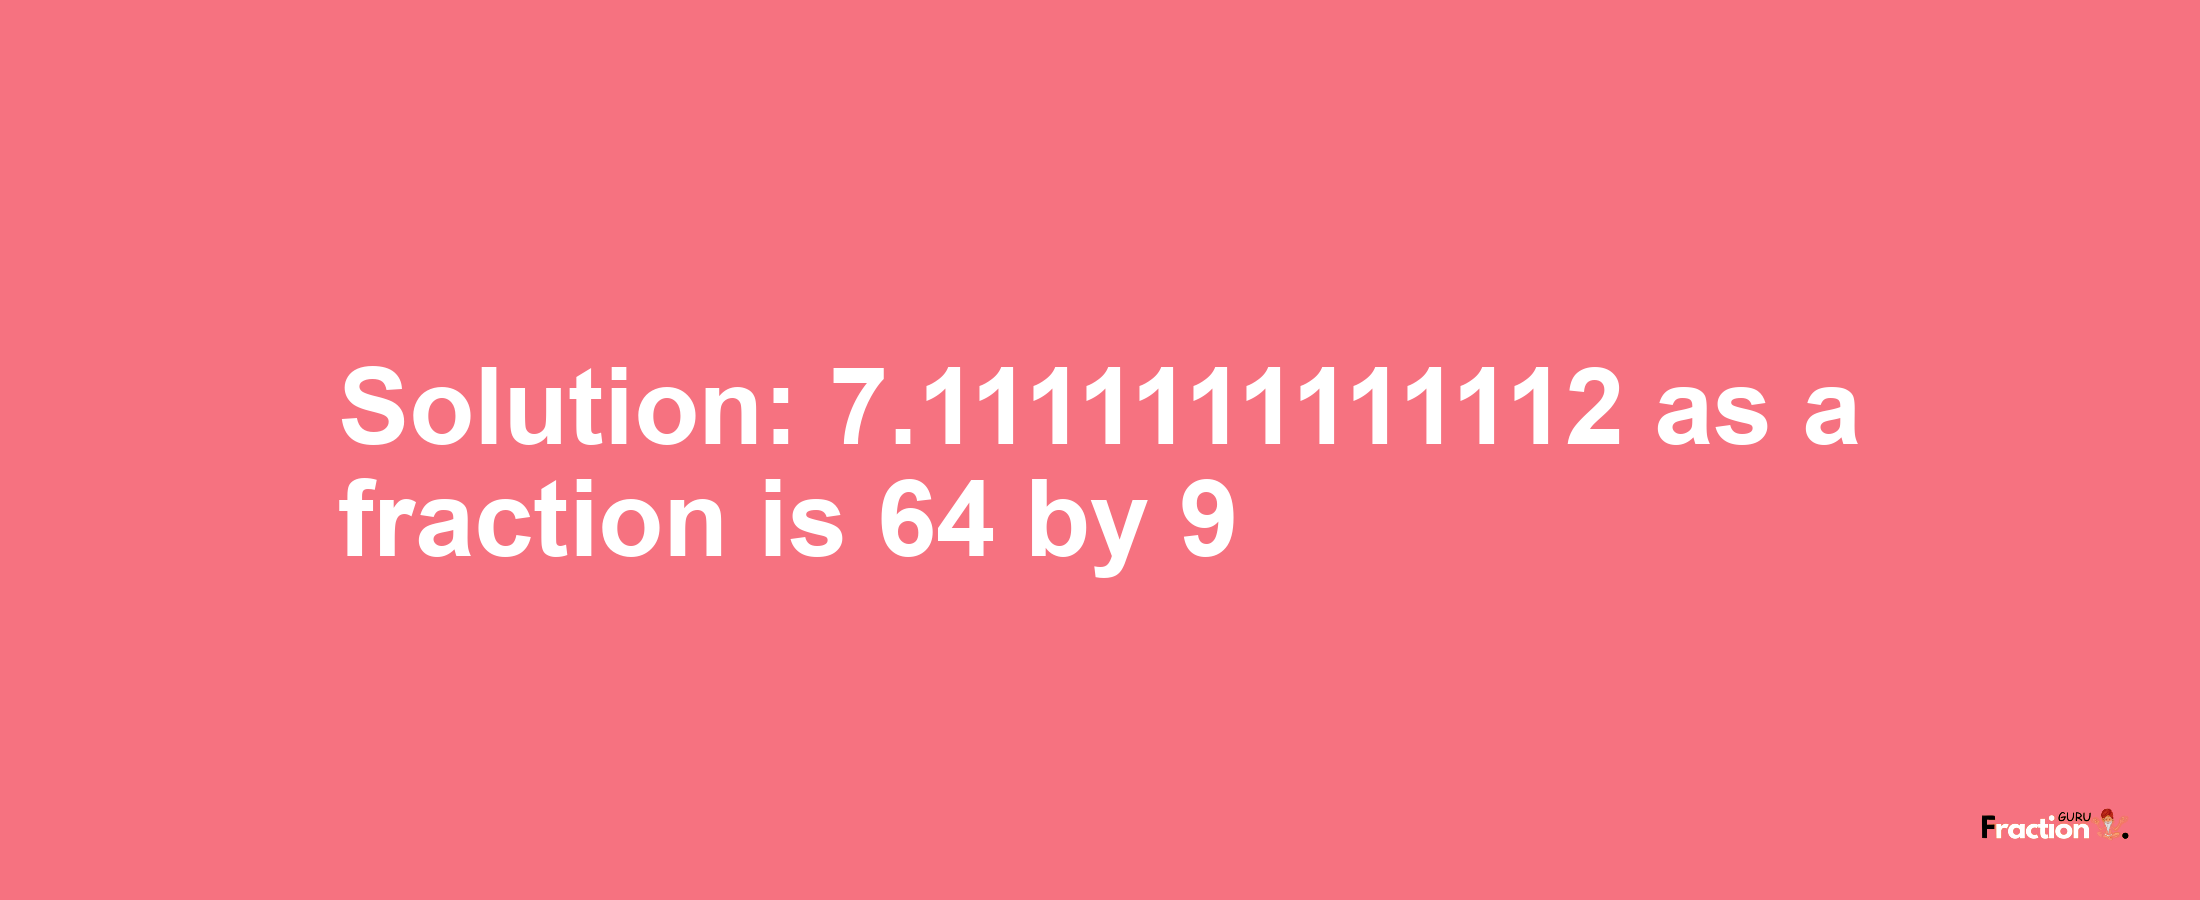 Solution:7.1111111111112 as a fraction is 64/9